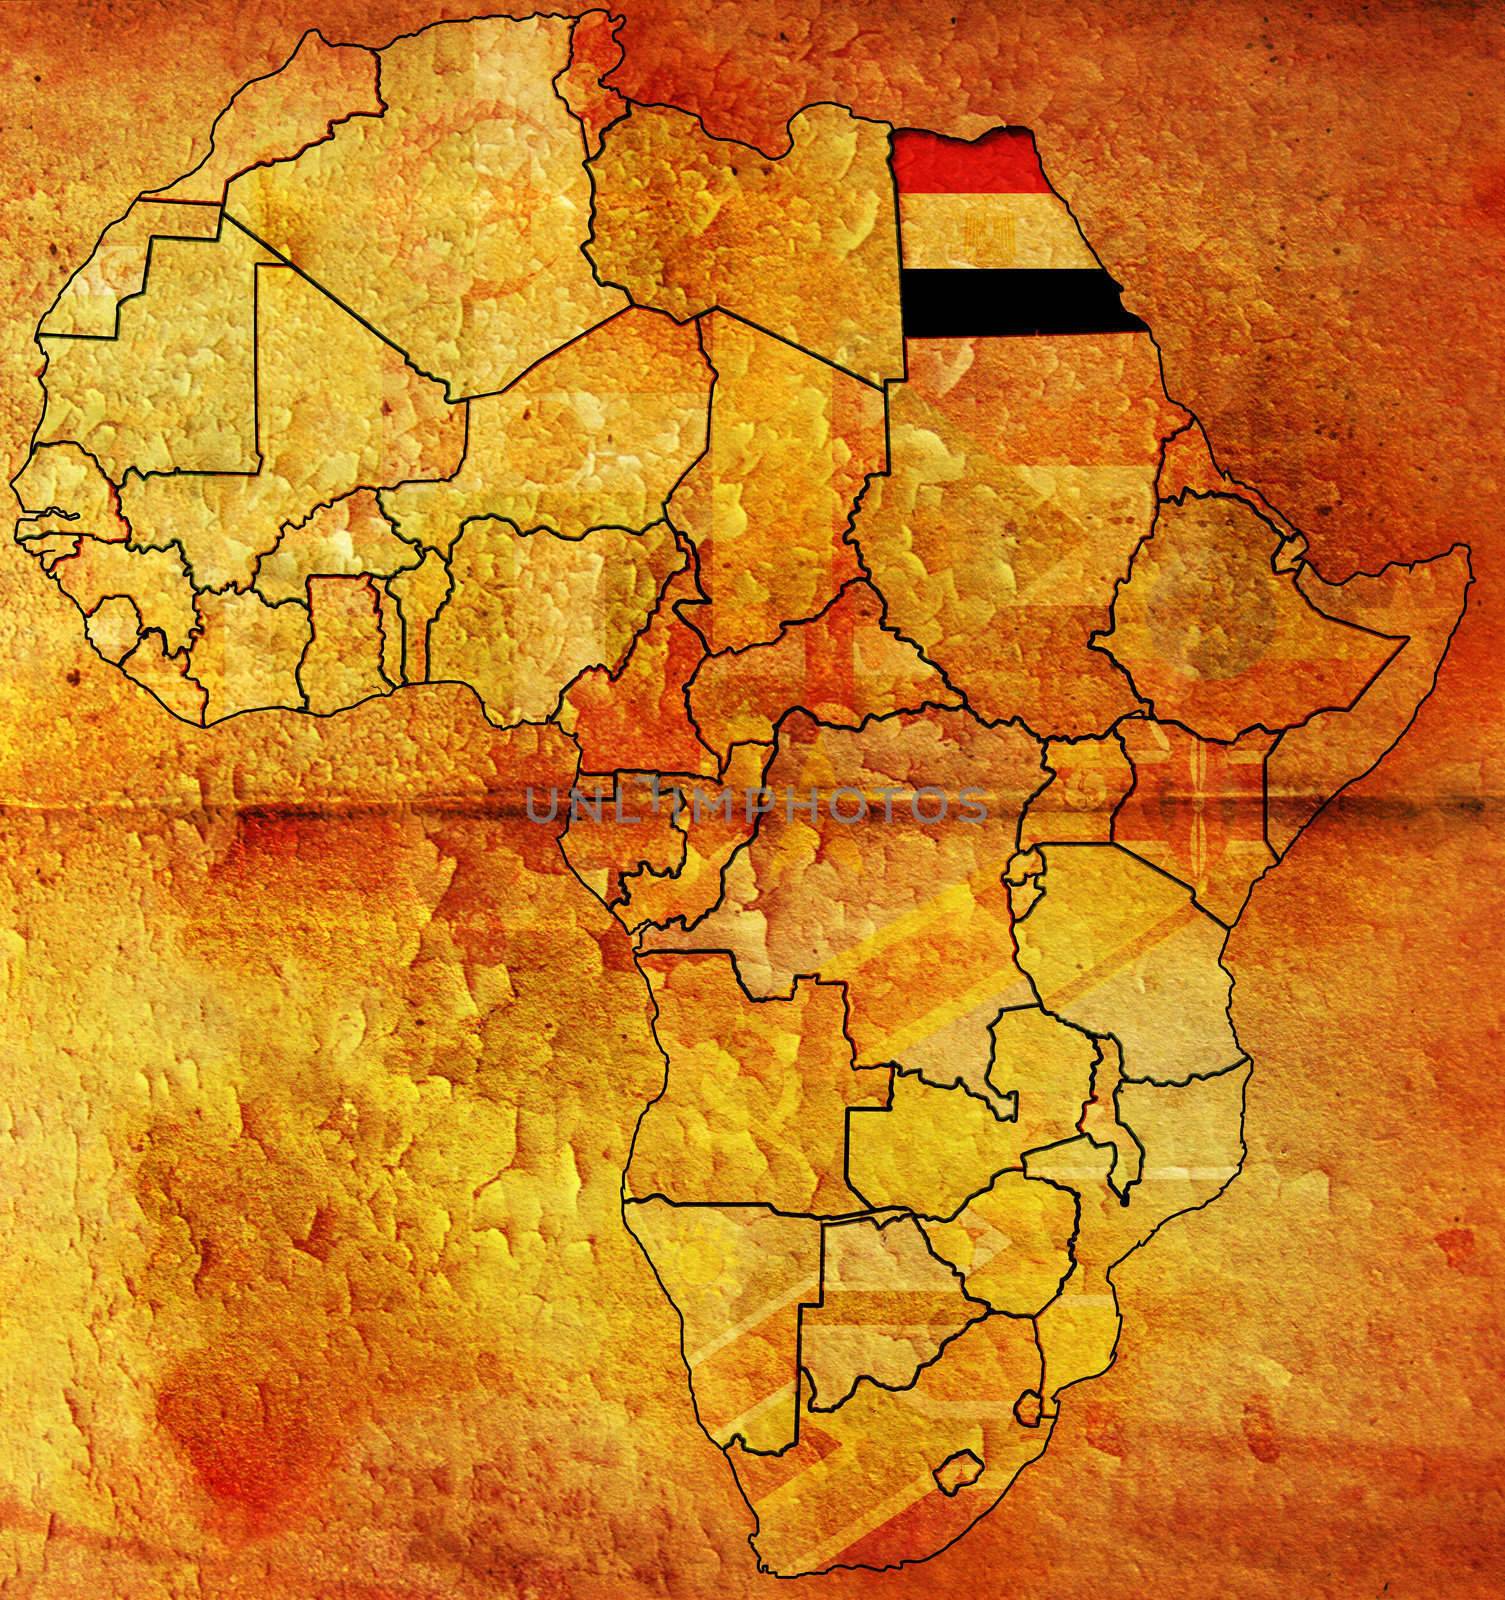 egypt on africa map by michal812